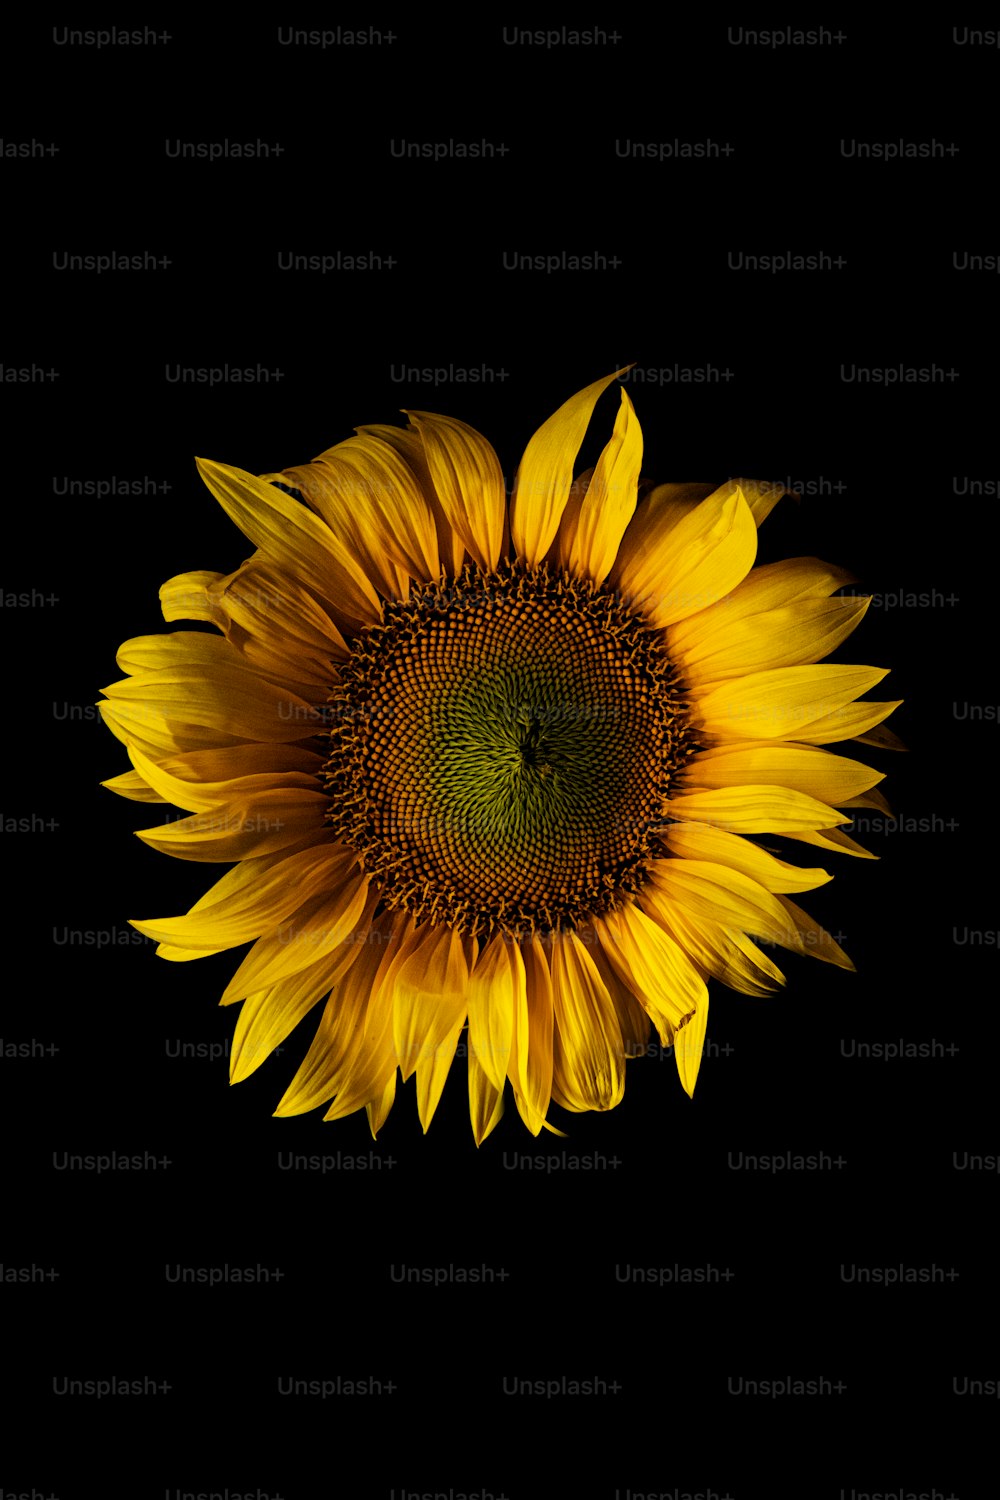 a large yellow sunflower with a black background